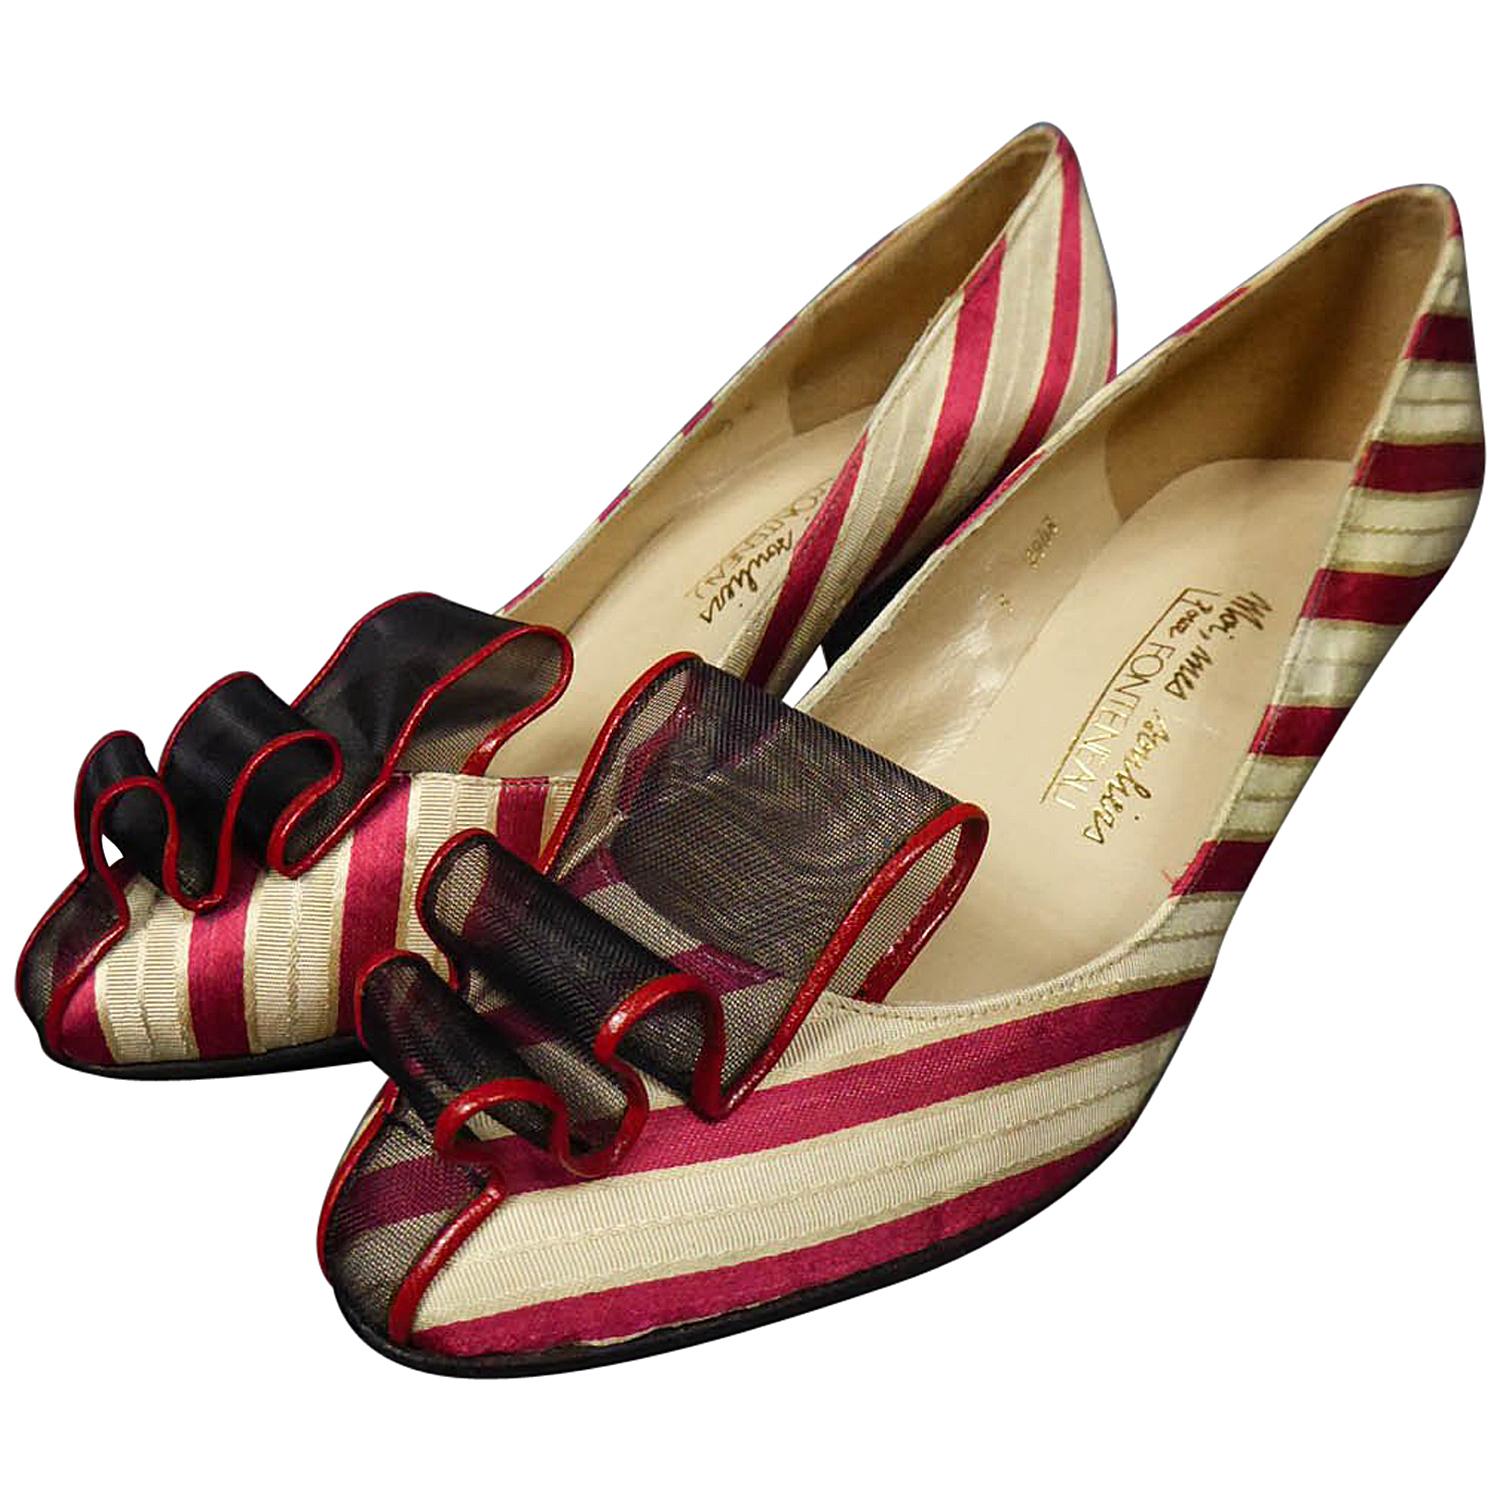 Numbered Fonteneau French Heels Shoes Titled Moi, Mes Souliers Circa 1960